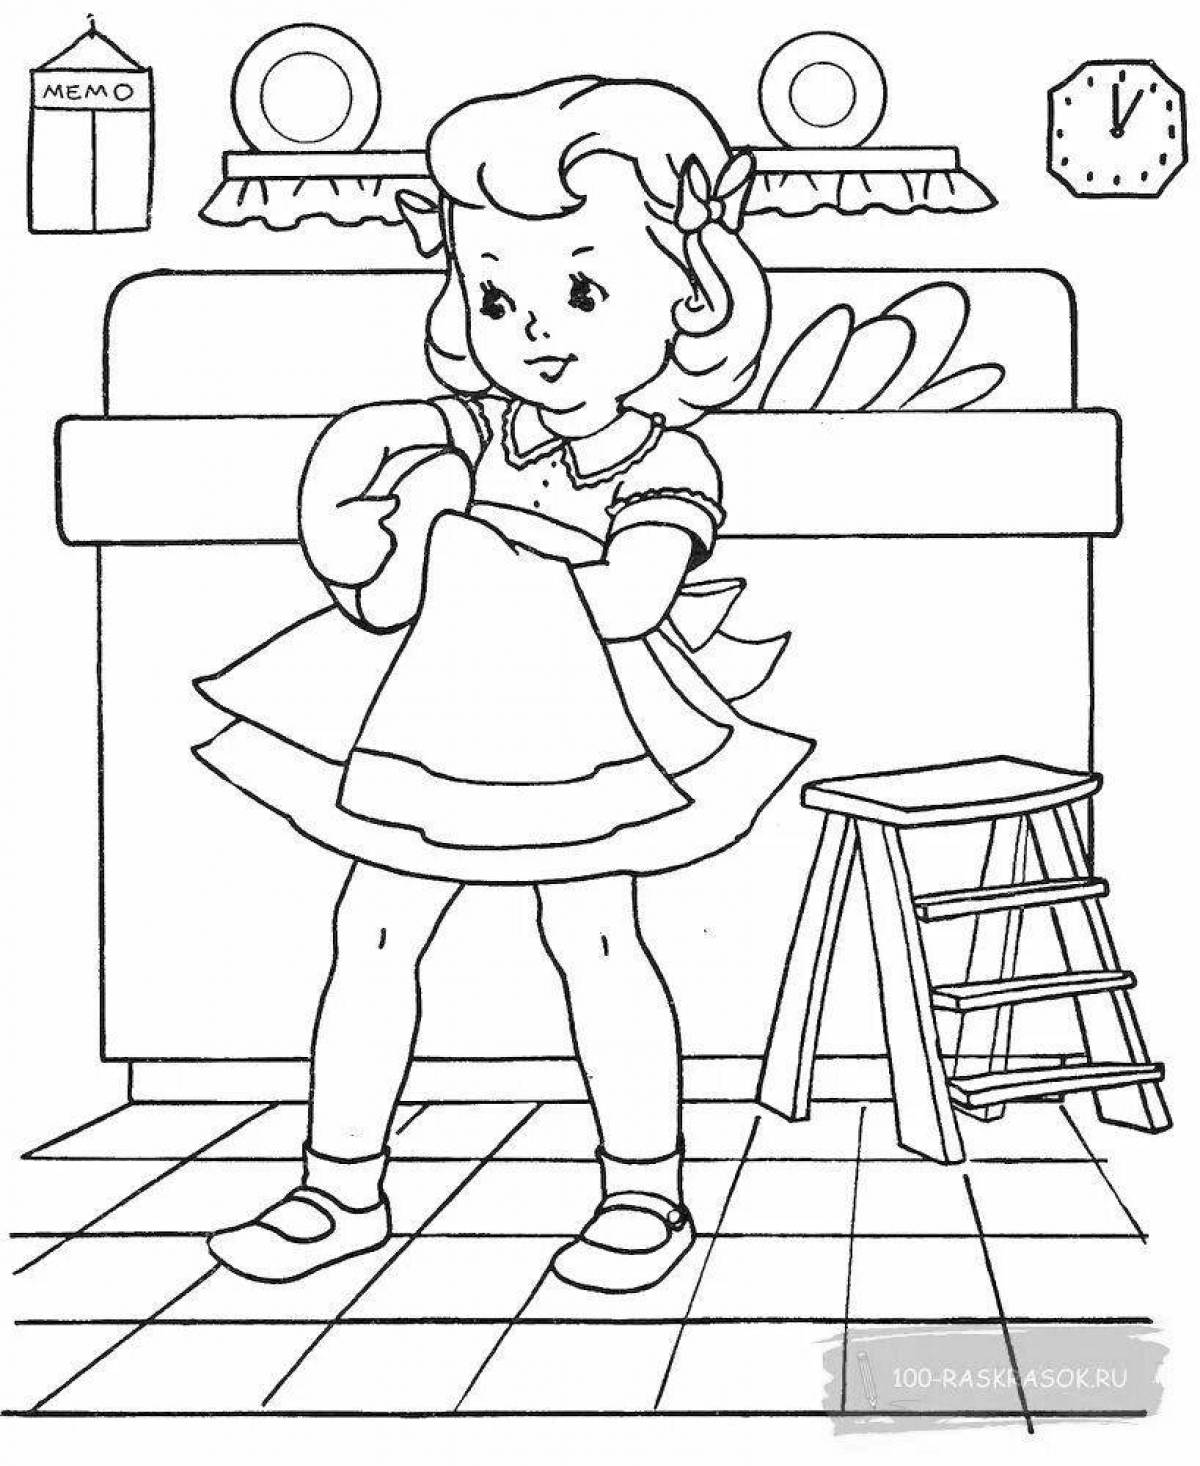 Mental affairs for children coloring